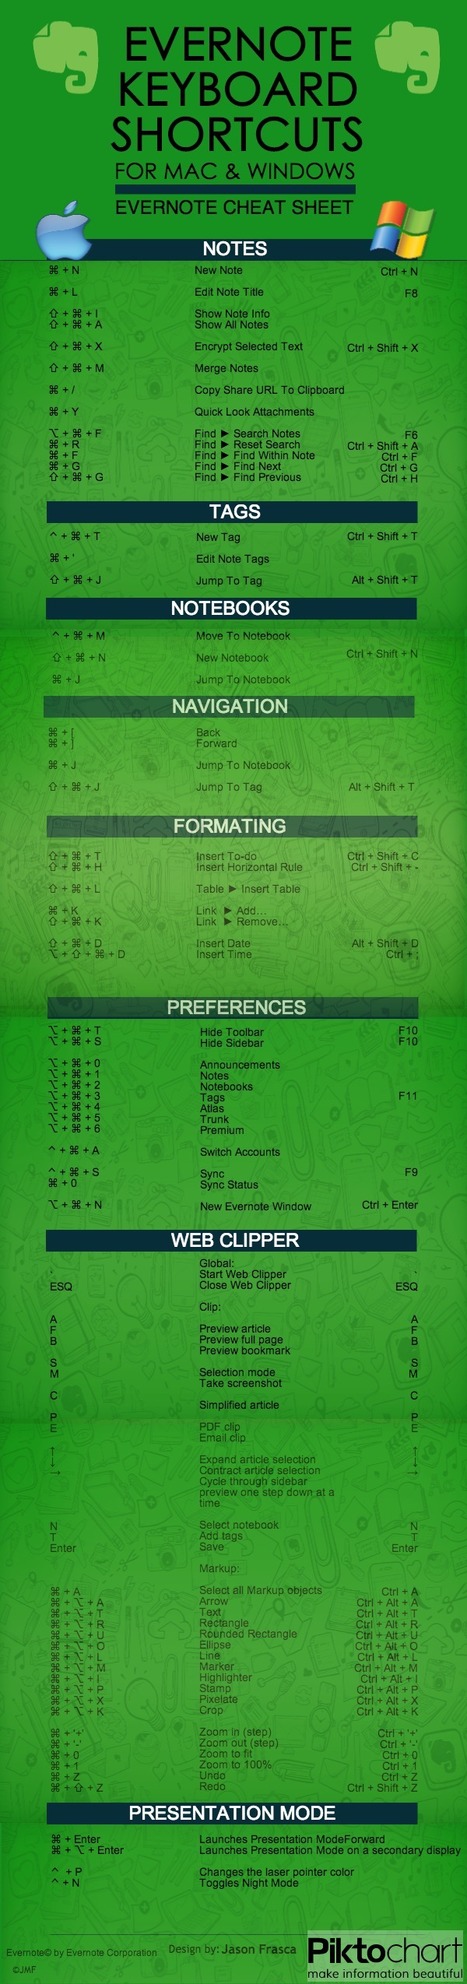 Evernote Keyboard Shortcuts for Mac & Windows Cheat Sheet [INFOGRAPHIC] | Time to Learn | Scoop.it